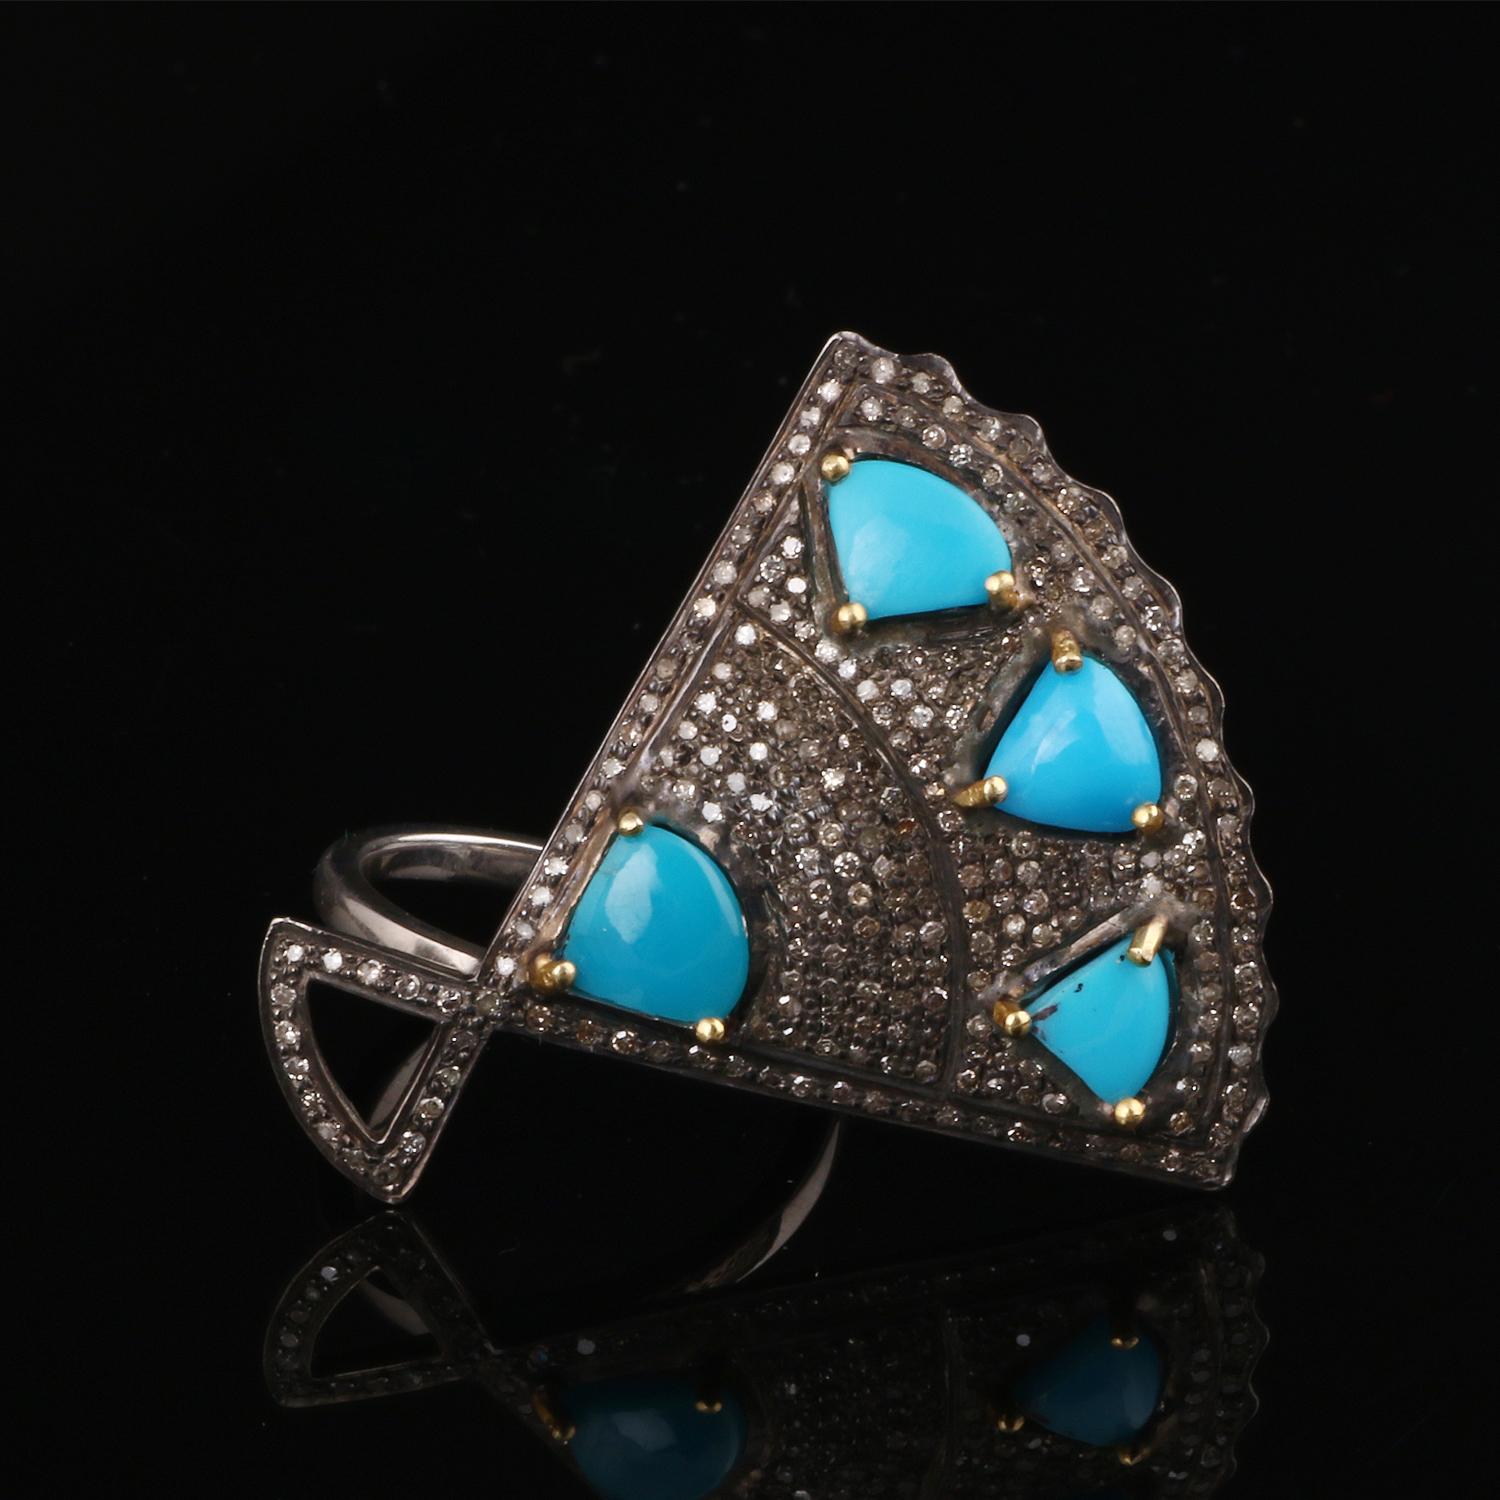 Item details:-

✦ SKU:- ESRG00197

✦ Material :- Silver
✦ Gemstone Specification:-
✧ Diamond
✧ Turquoise

✦ Approx. Diamond Weight : 1.1
✦ Approx. Silver Weight : 8.09
✦ Approx. Gross Weight : 9.01

Ring Size (US): 7.5

You will Get the same Product